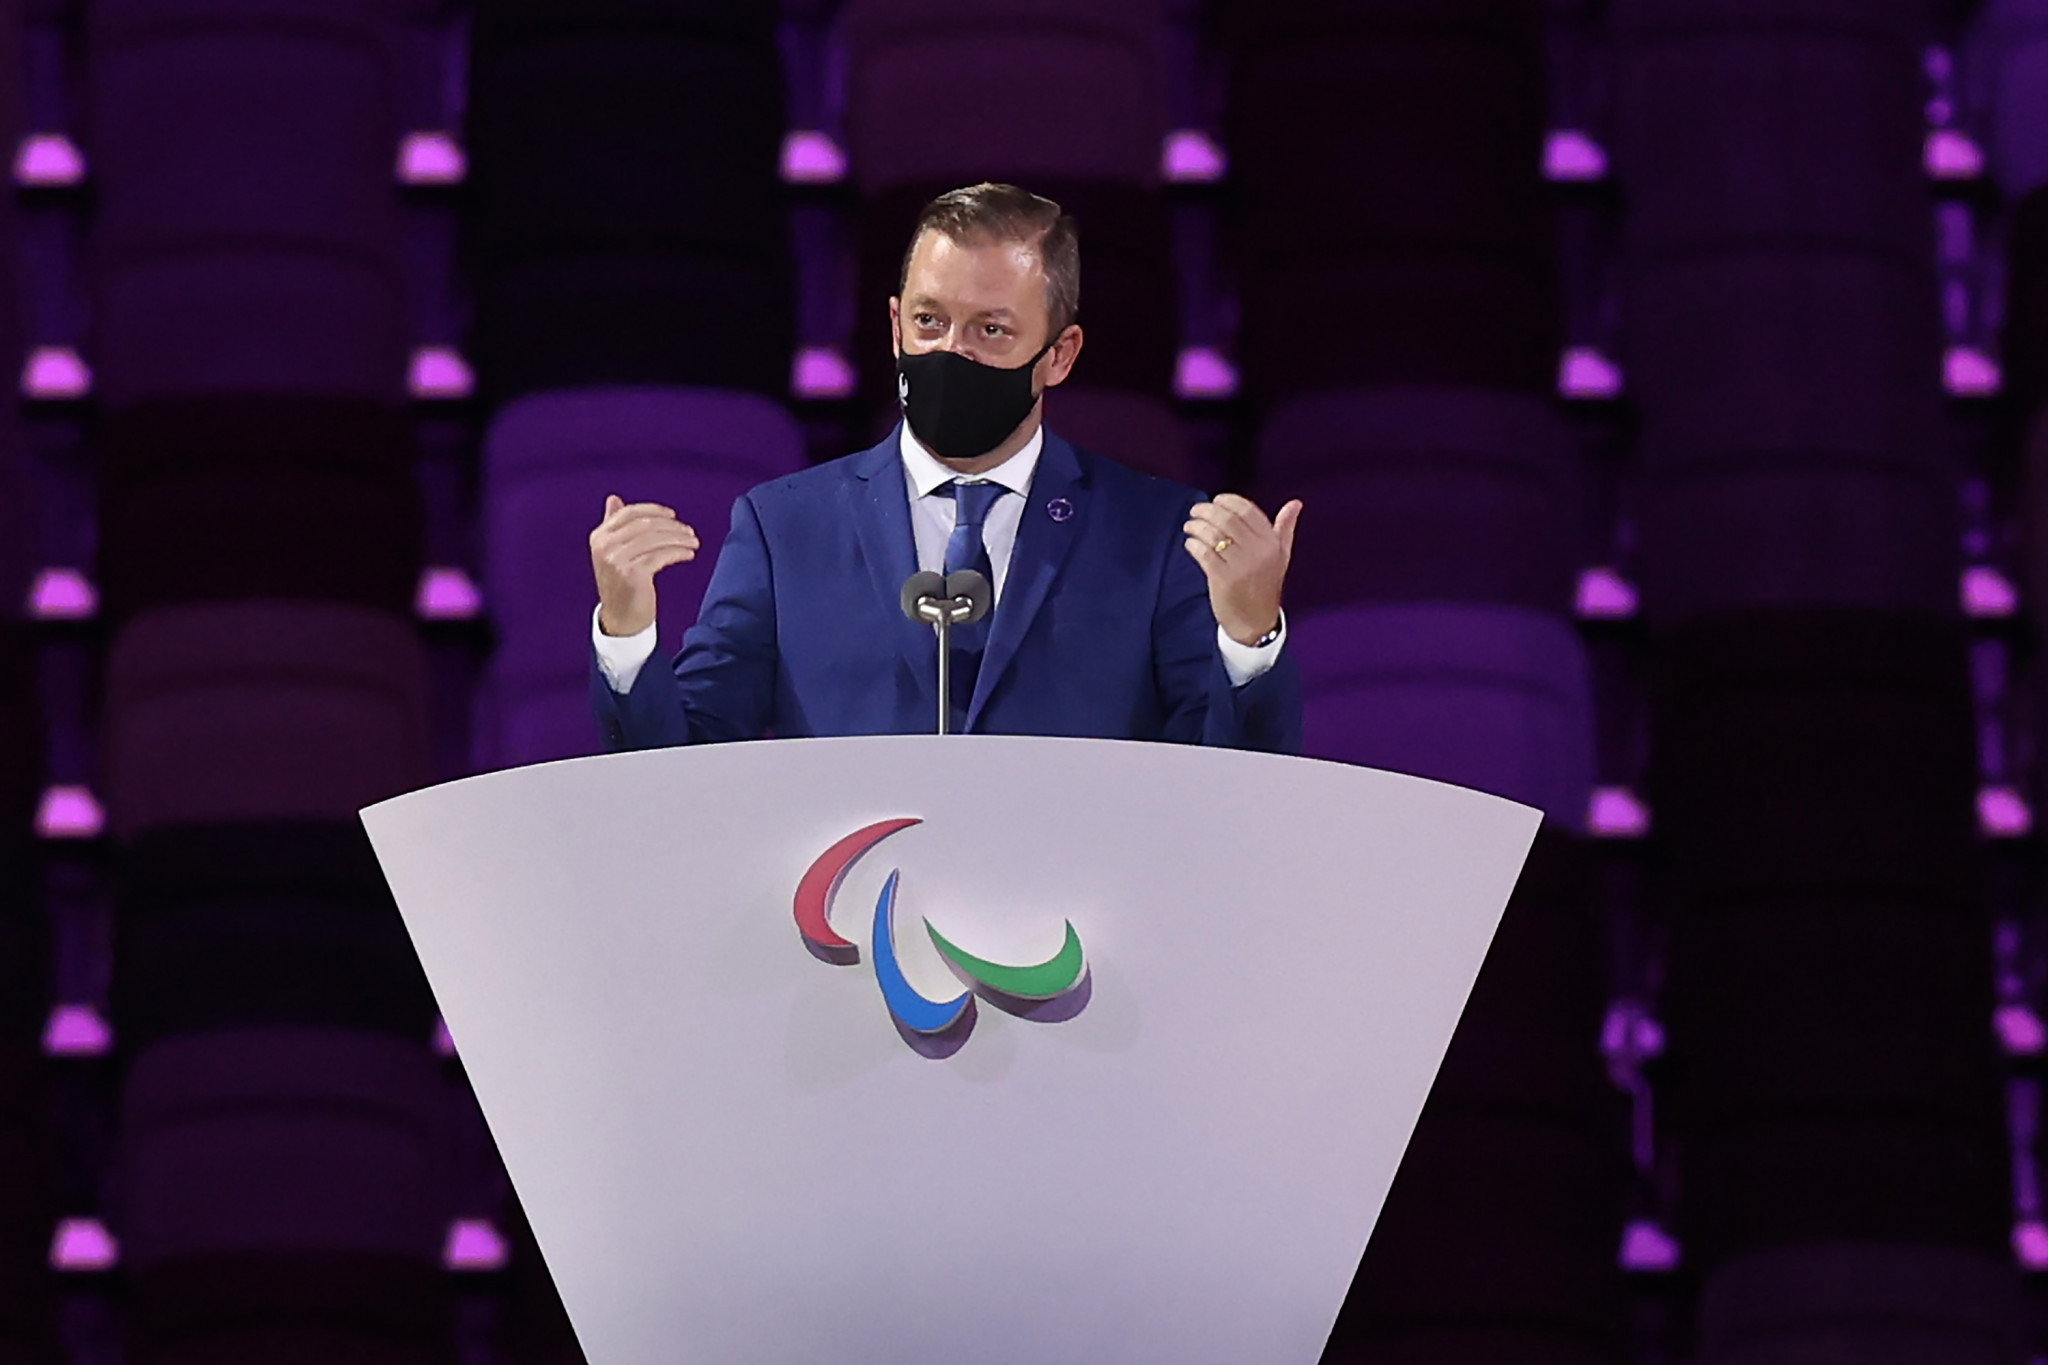 IPC President Parsons calls for more inclusive society at Tokyo 2020 Paralympics Opening Ceremony